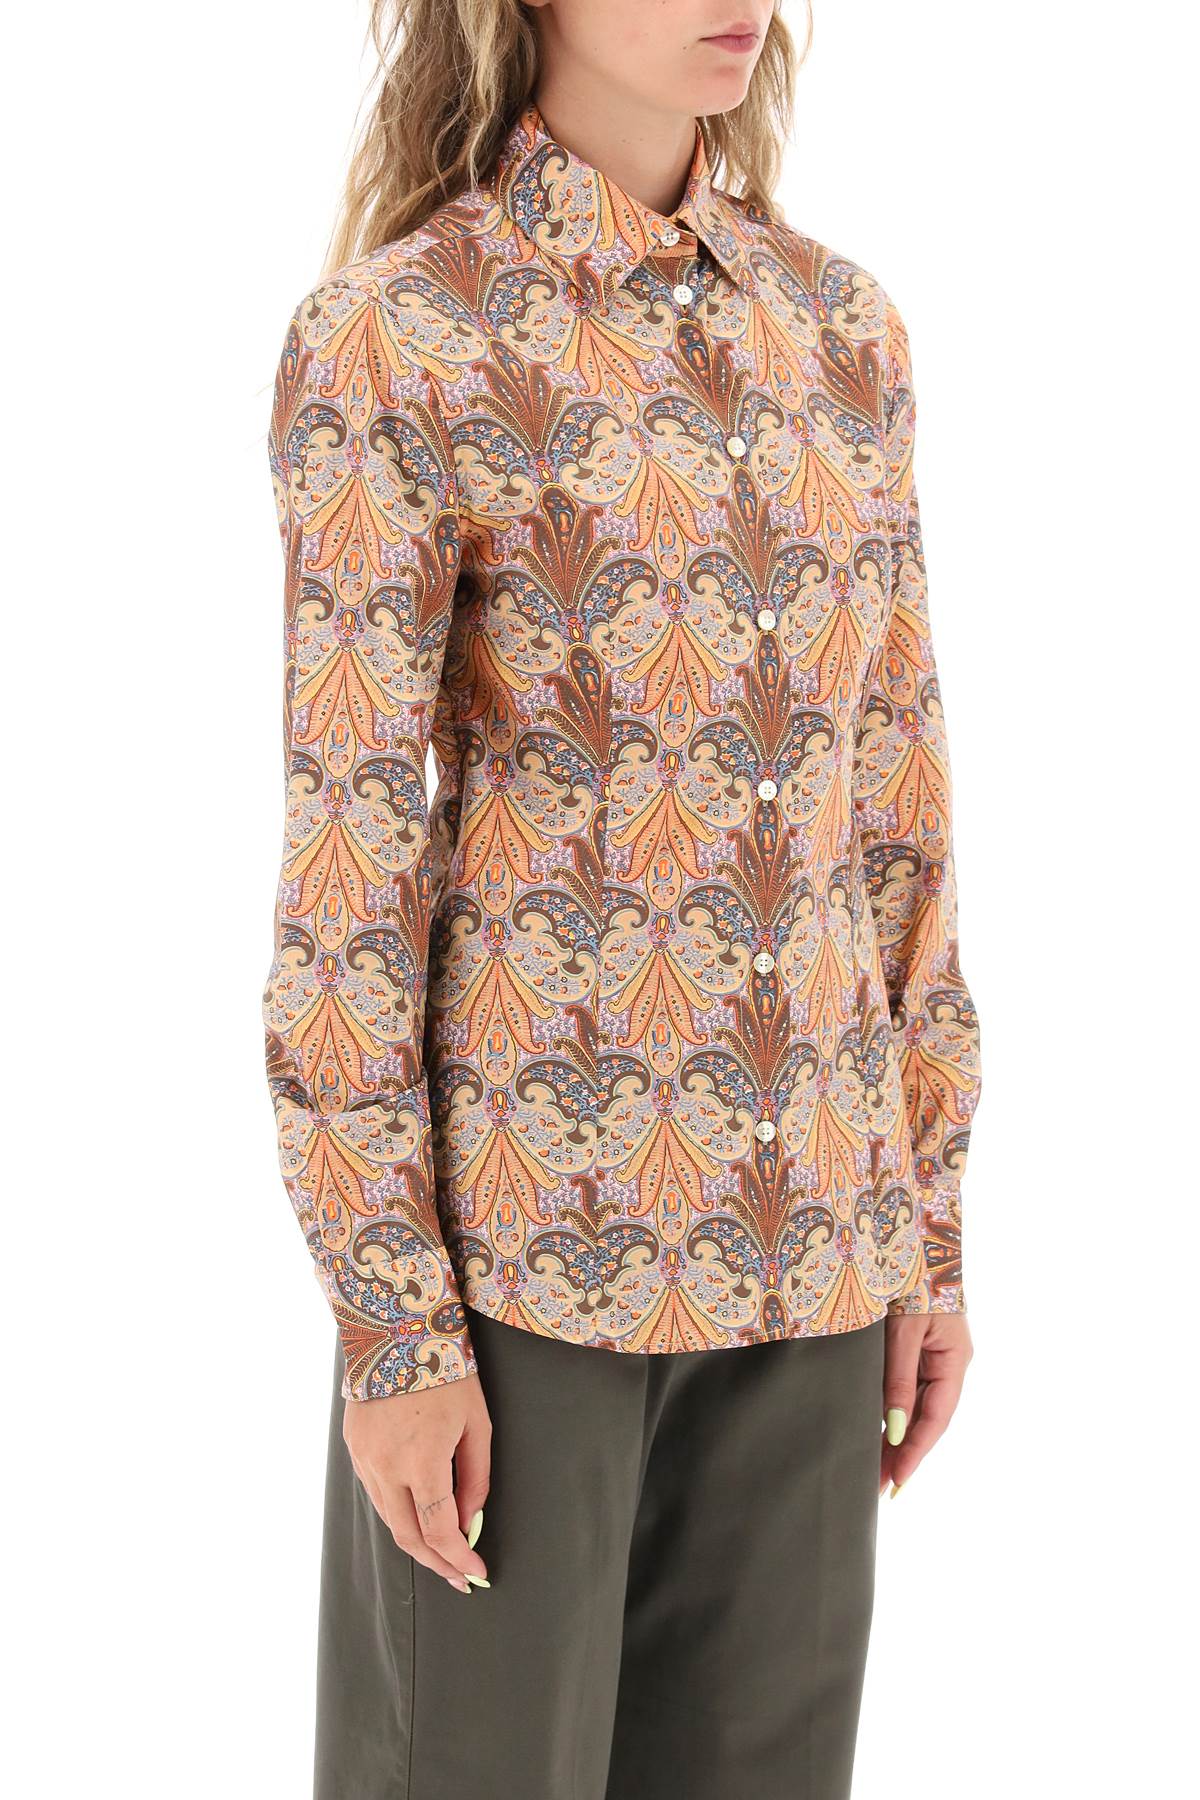 Etro slim fit shirt with paisley pattern-1